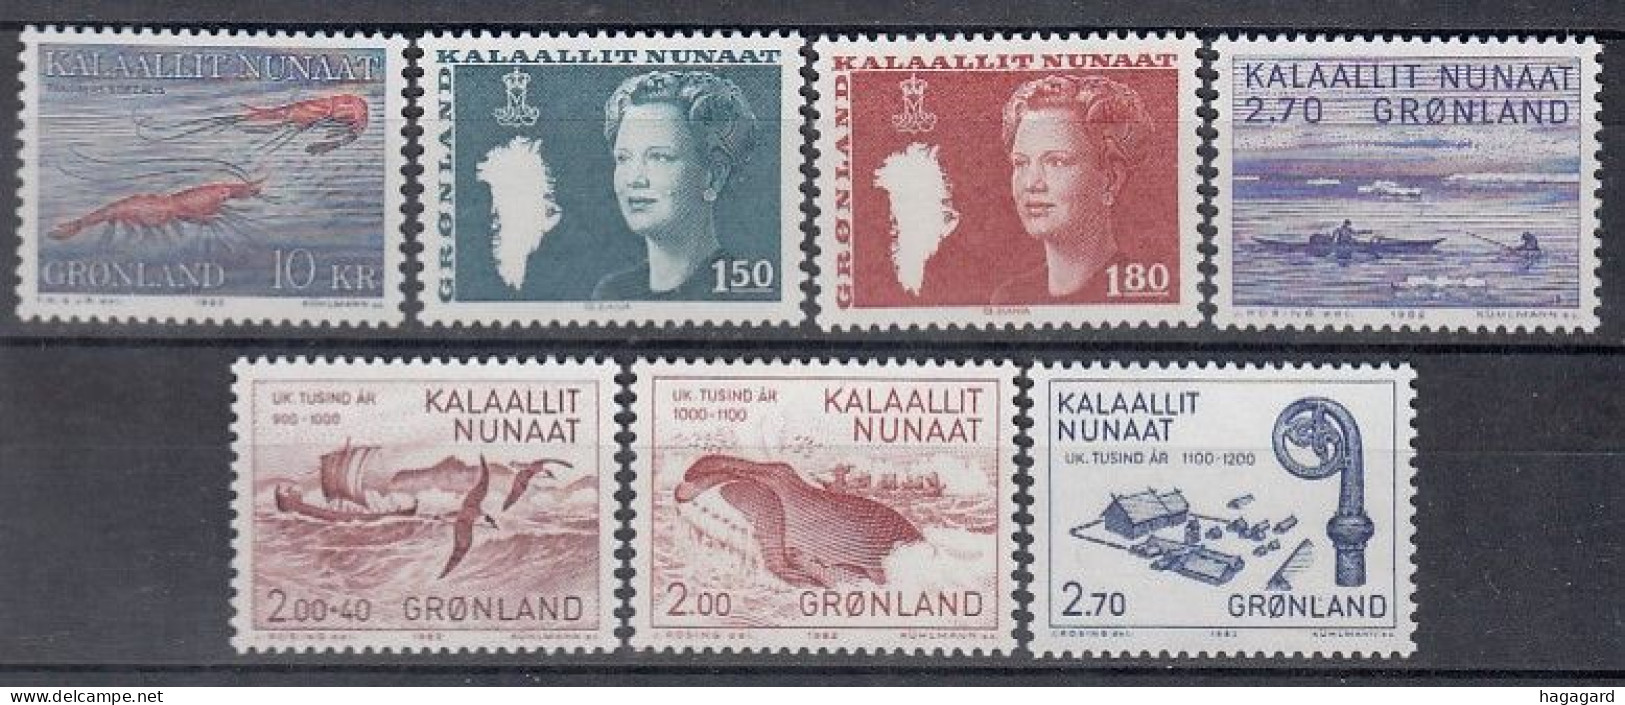 B1717. Greenland 1982. Complete Year Set. Michel 133-39. (7.60€). MNH(**) - Années Complètes